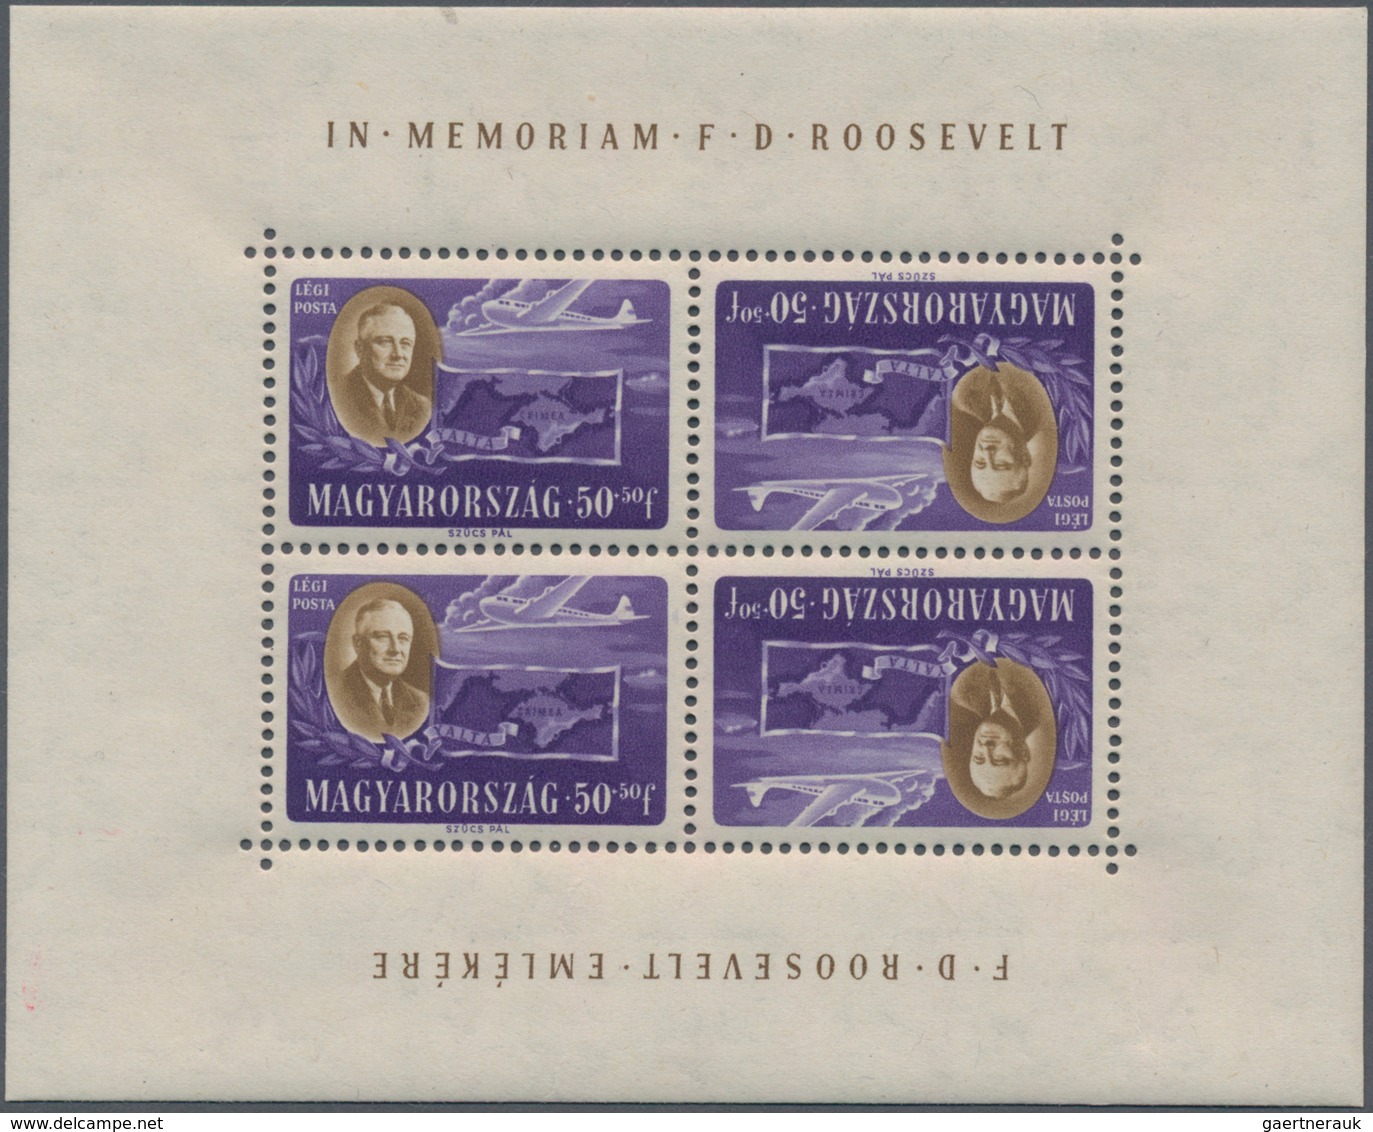 Ungarn: 1947, Roosevelt, complete set of eight values in tête-bêche mini sheets of four stamps each,